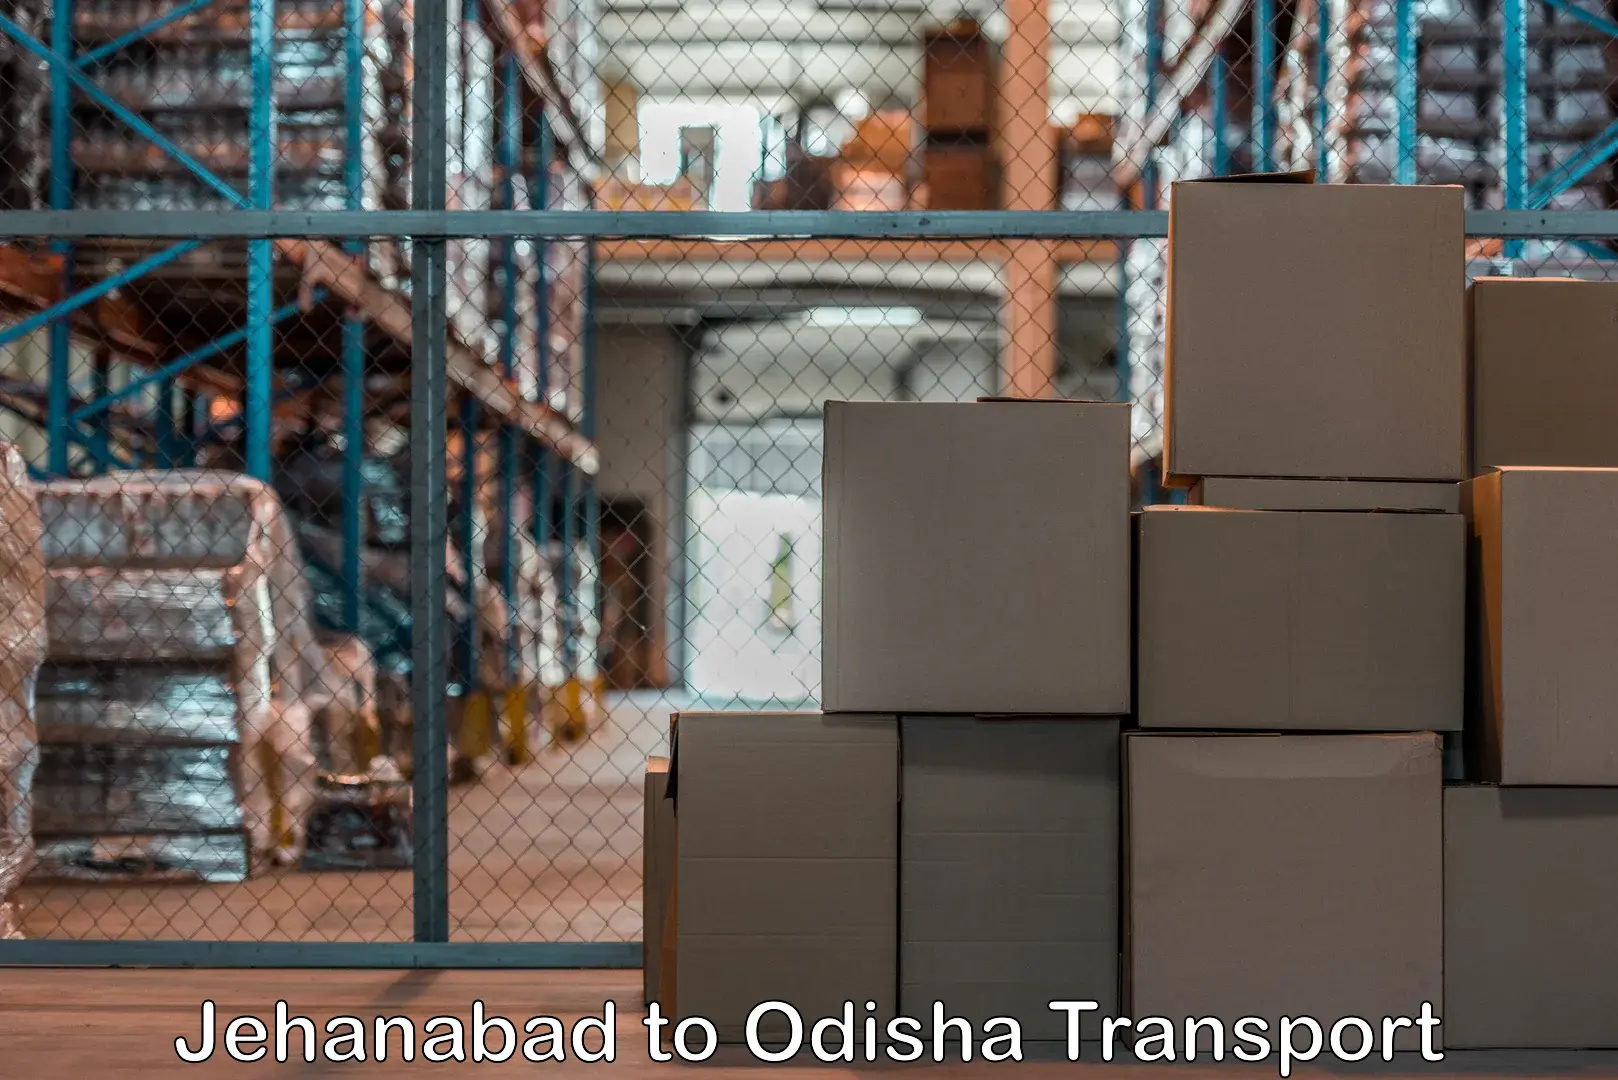 Daily parcel service transport Jehanabad to Puri